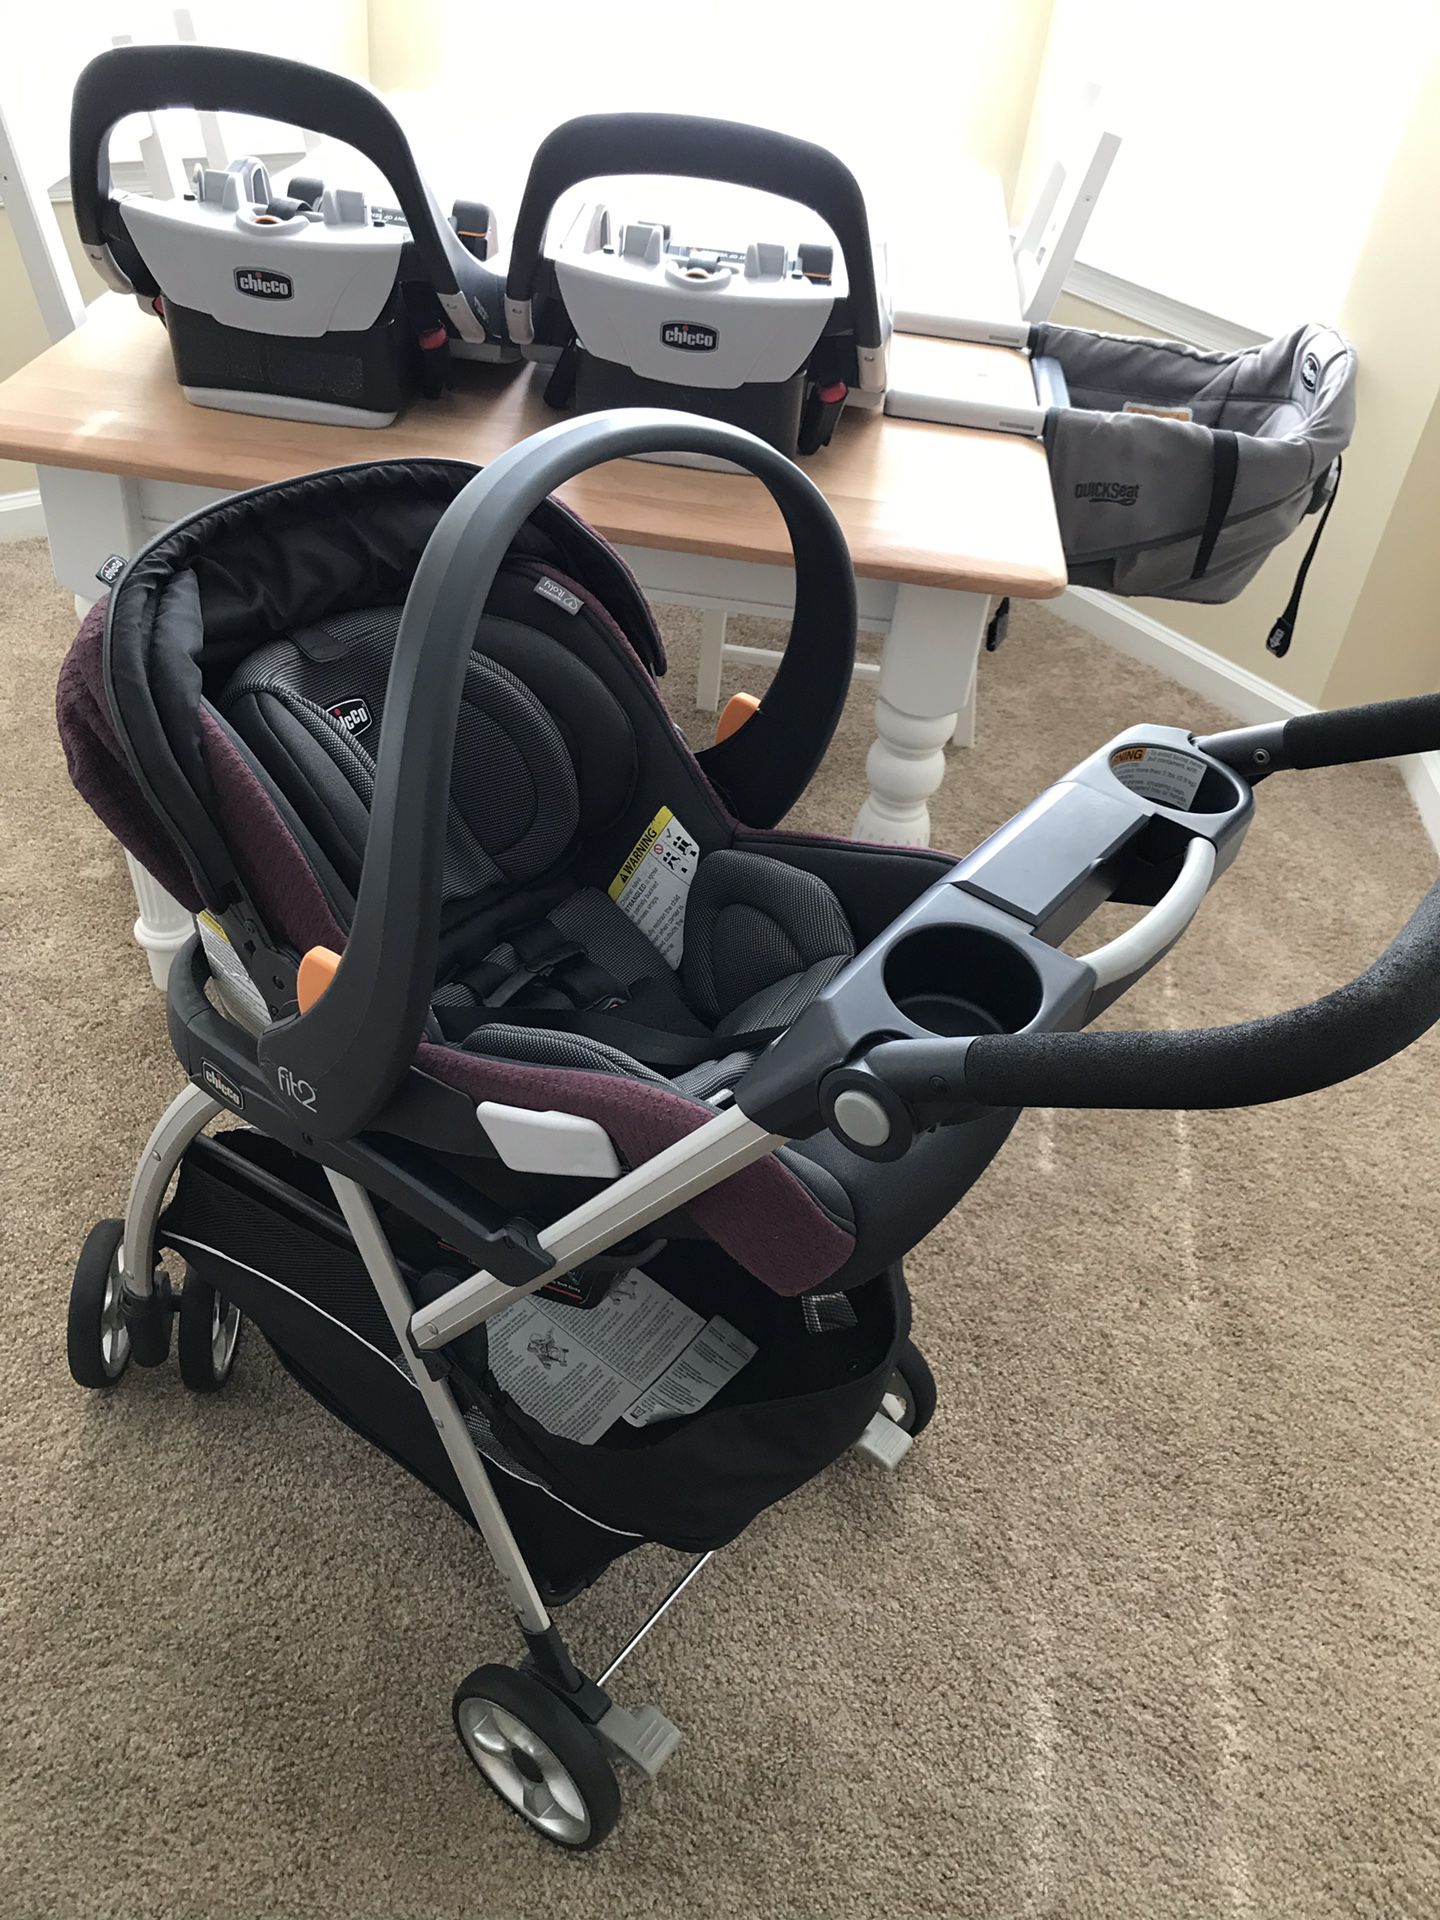 Chicco Fit2 car seat, 2 car seat bases, and KeyFit Caddy